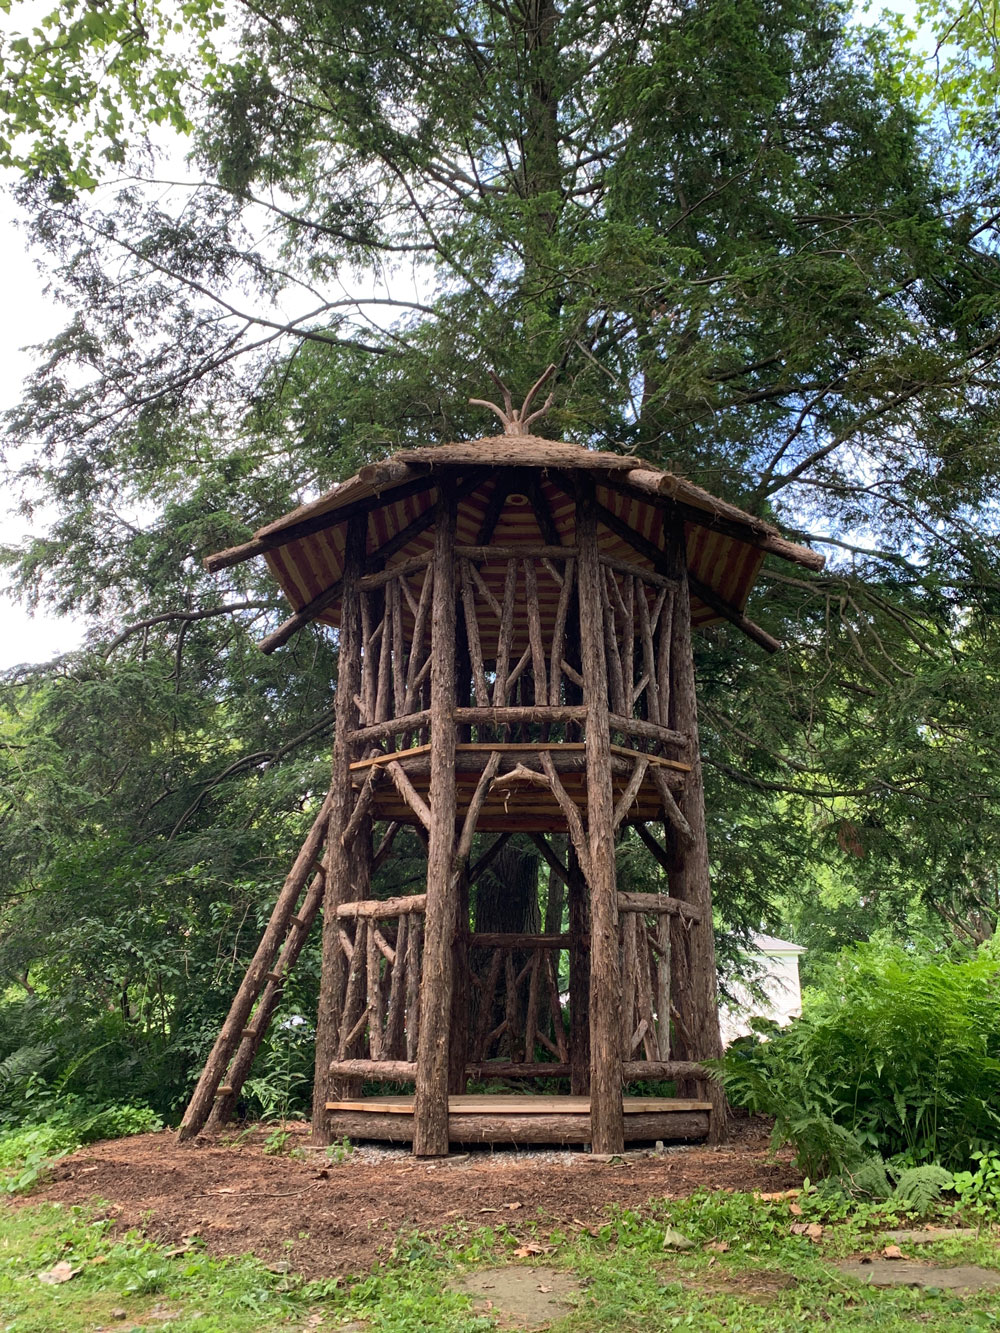 Outdoor rustic play tower built using bark-on trees and branches titled the Bedford Tower